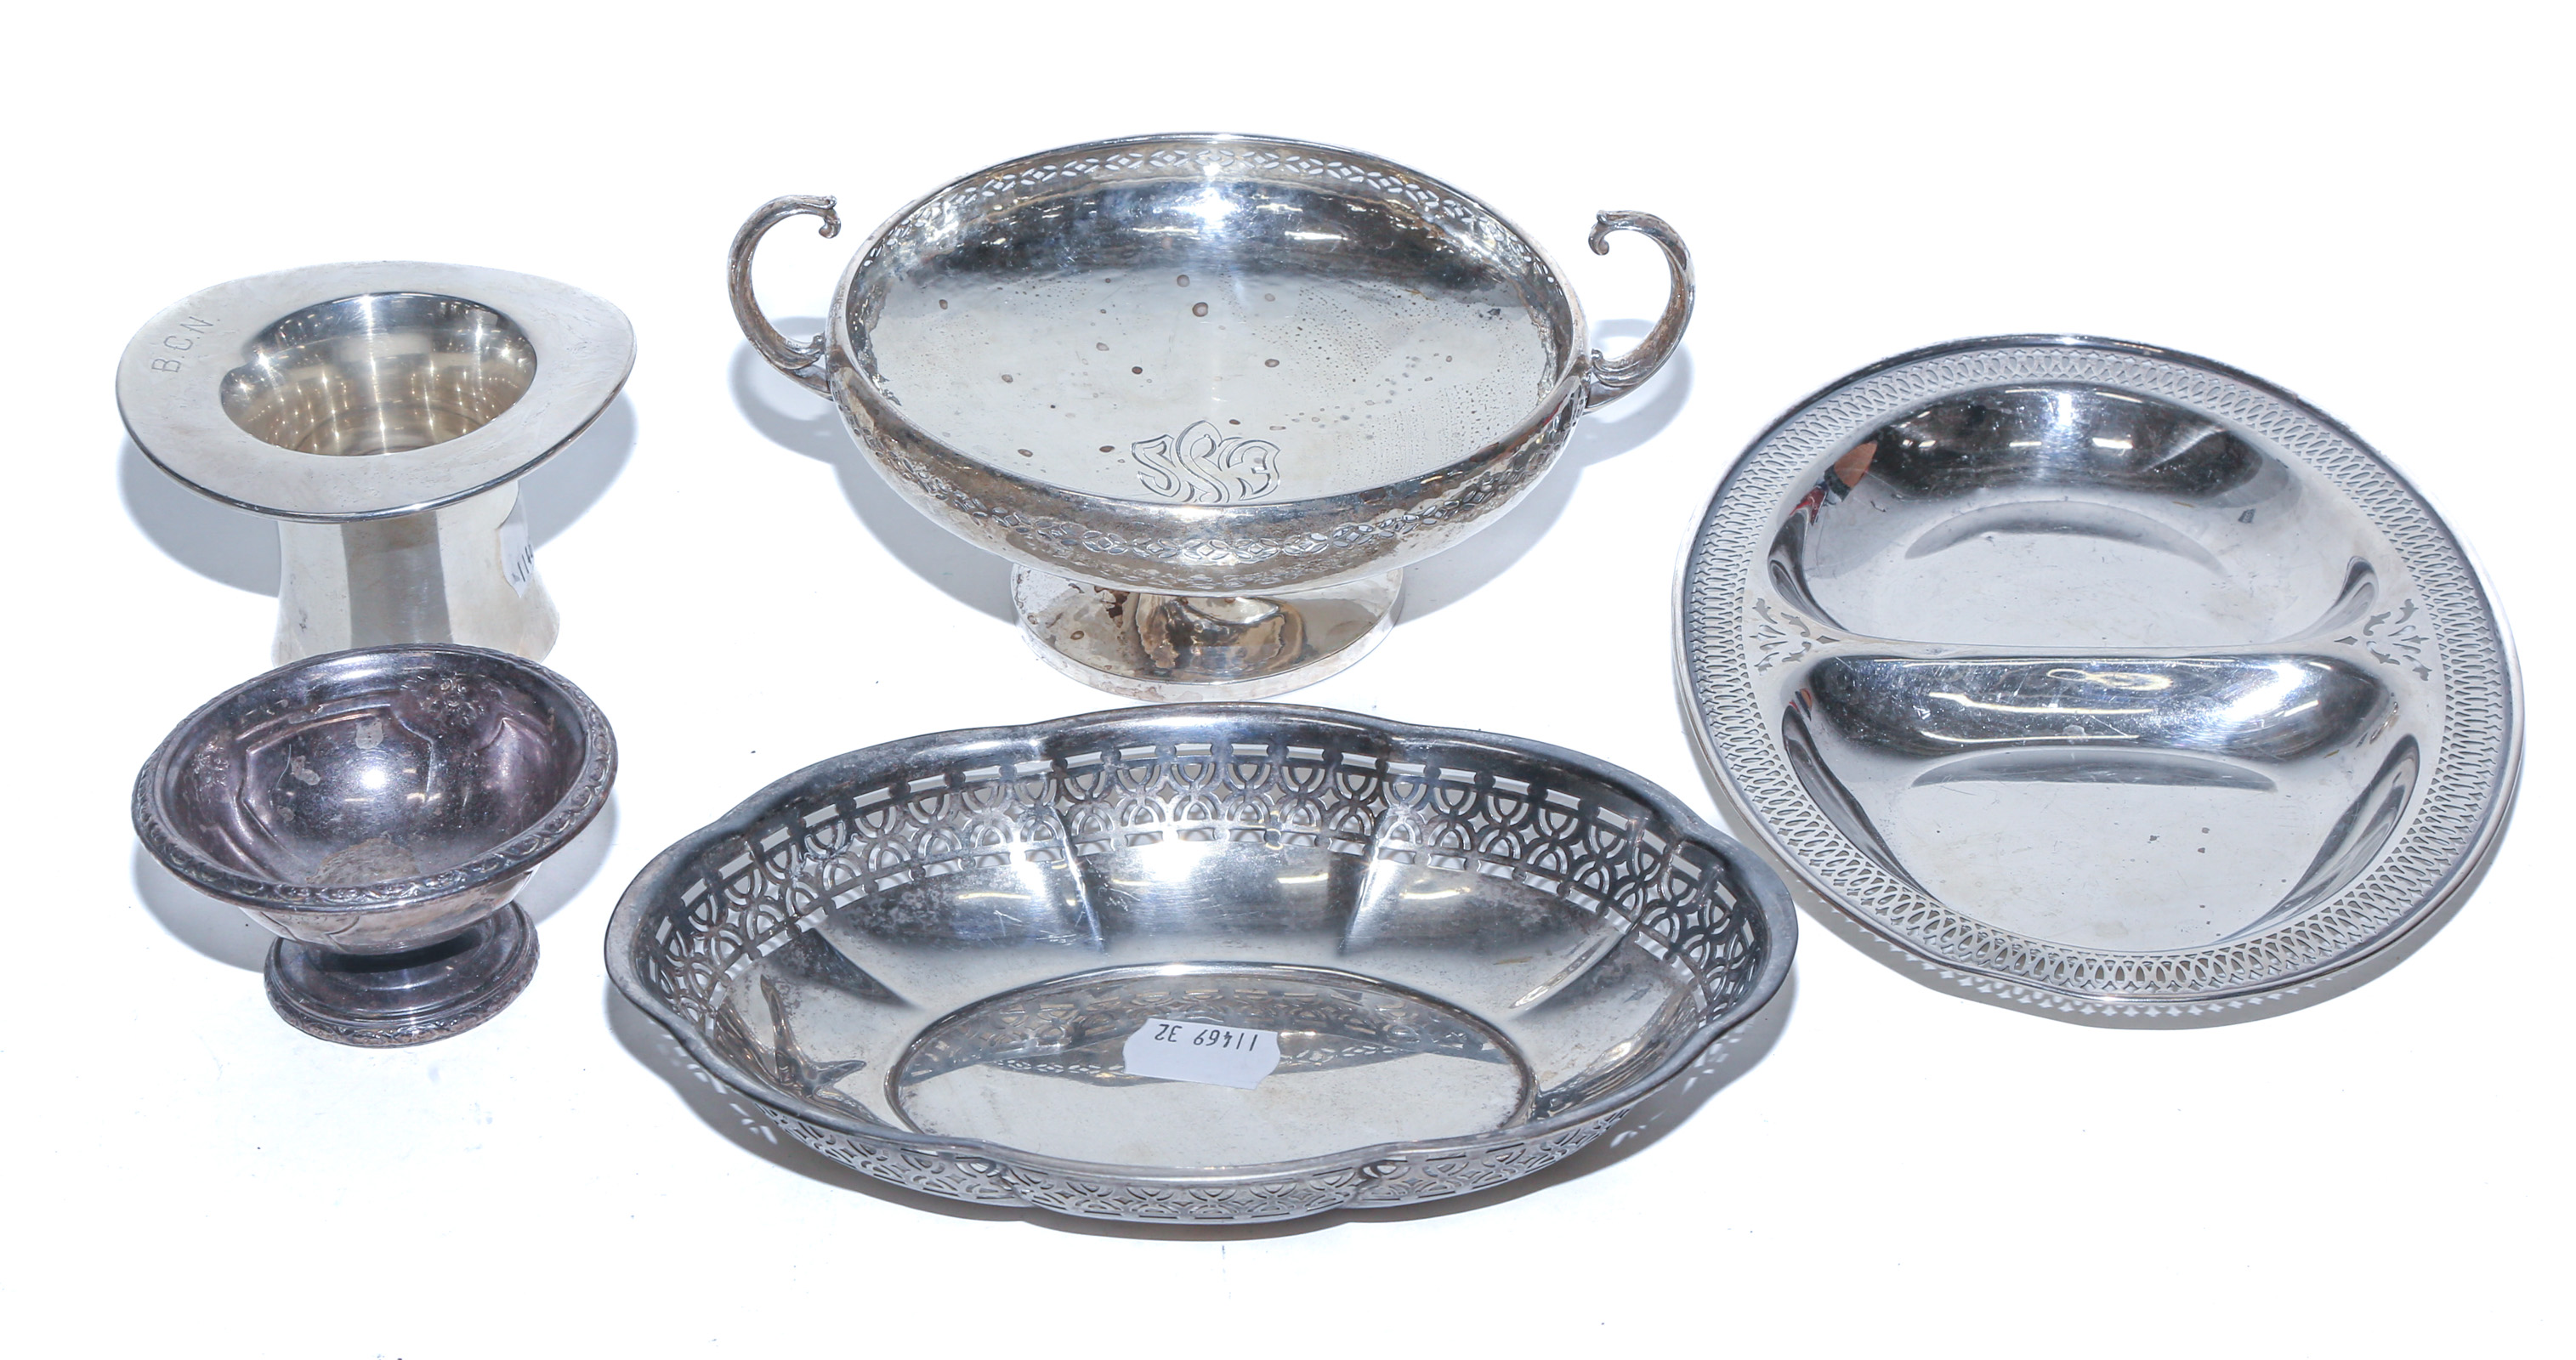 FIVE PIECES OF STERLING HOLLOWWARE 2e93a6